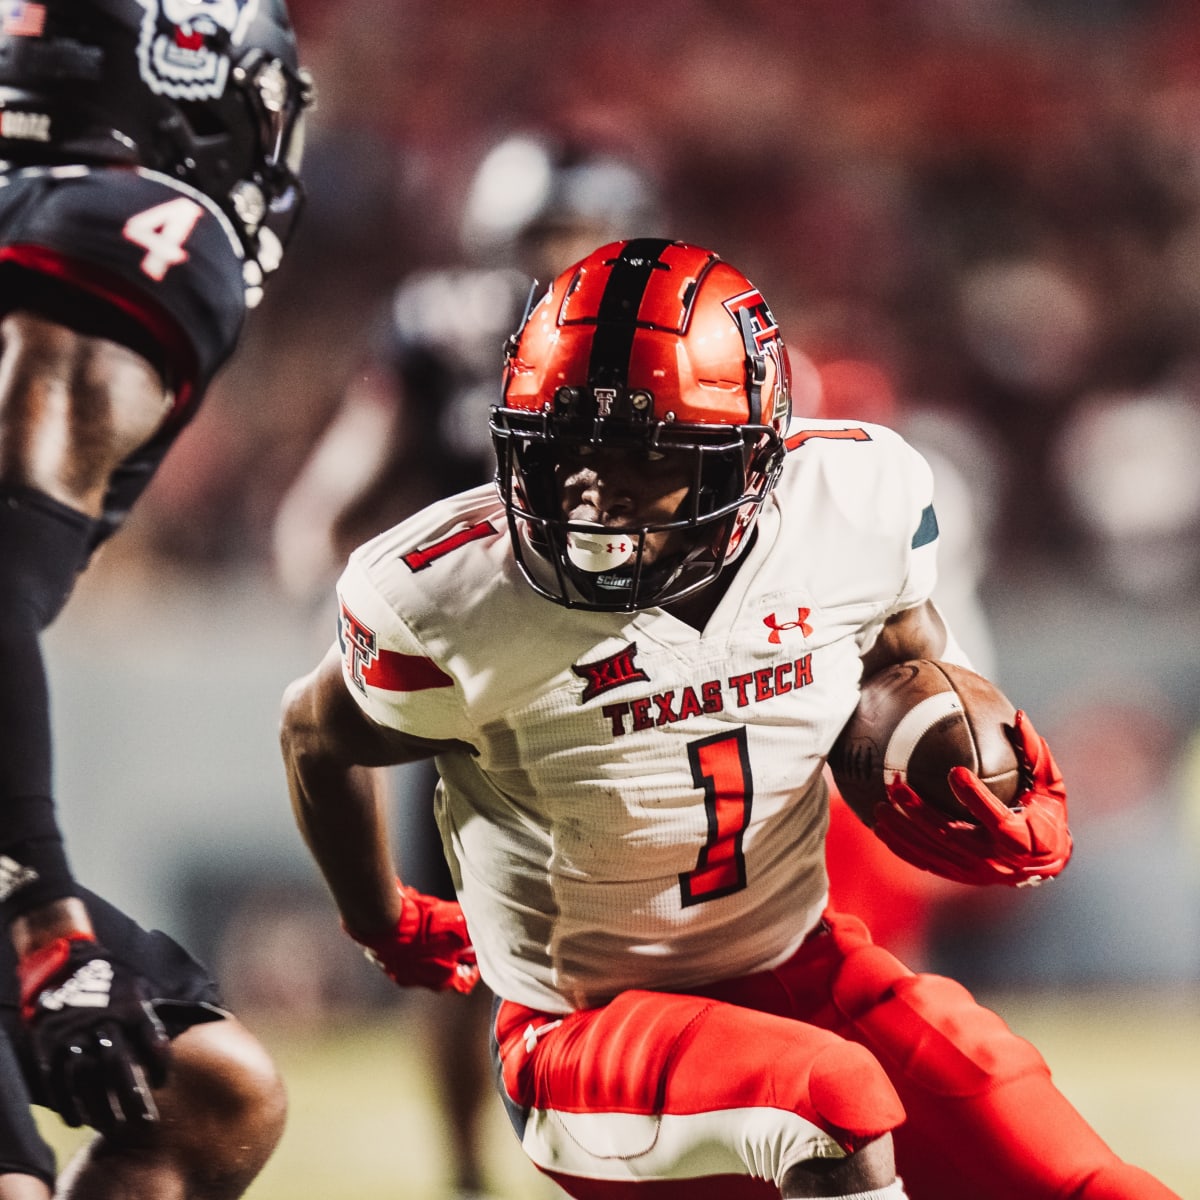 Texas Tech Red Raiders Team-Issued #26 Red Jersey from the Athletics Program